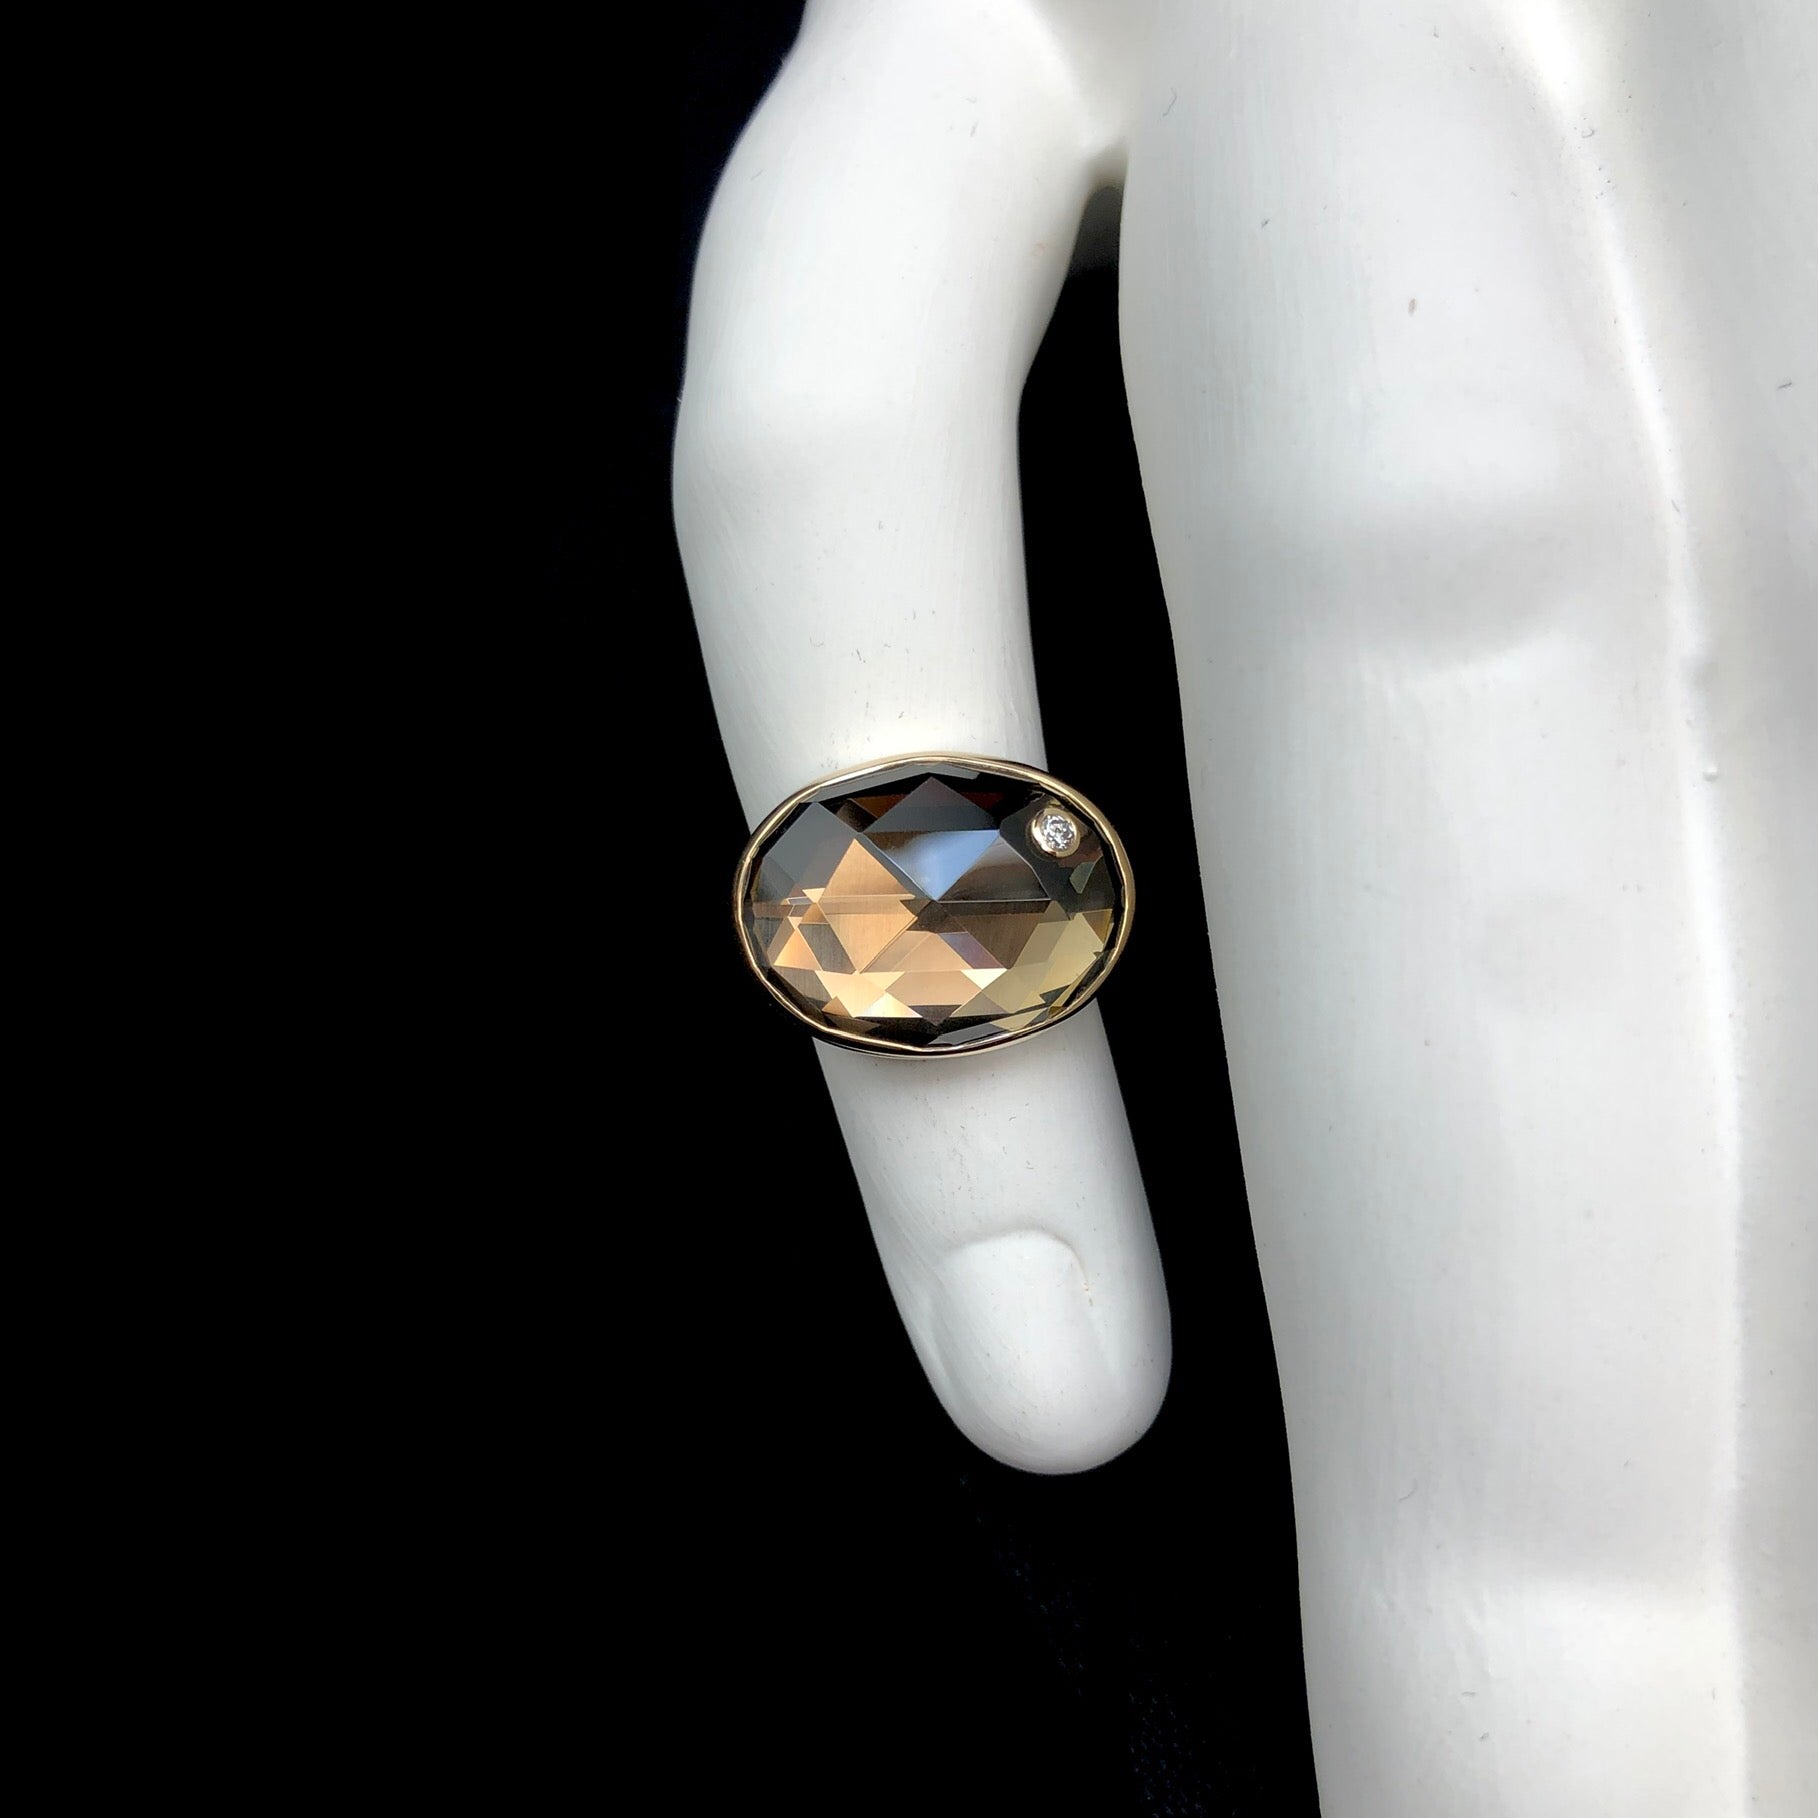 Top view of oval shaped smokey quartz ring on white ceramic finger